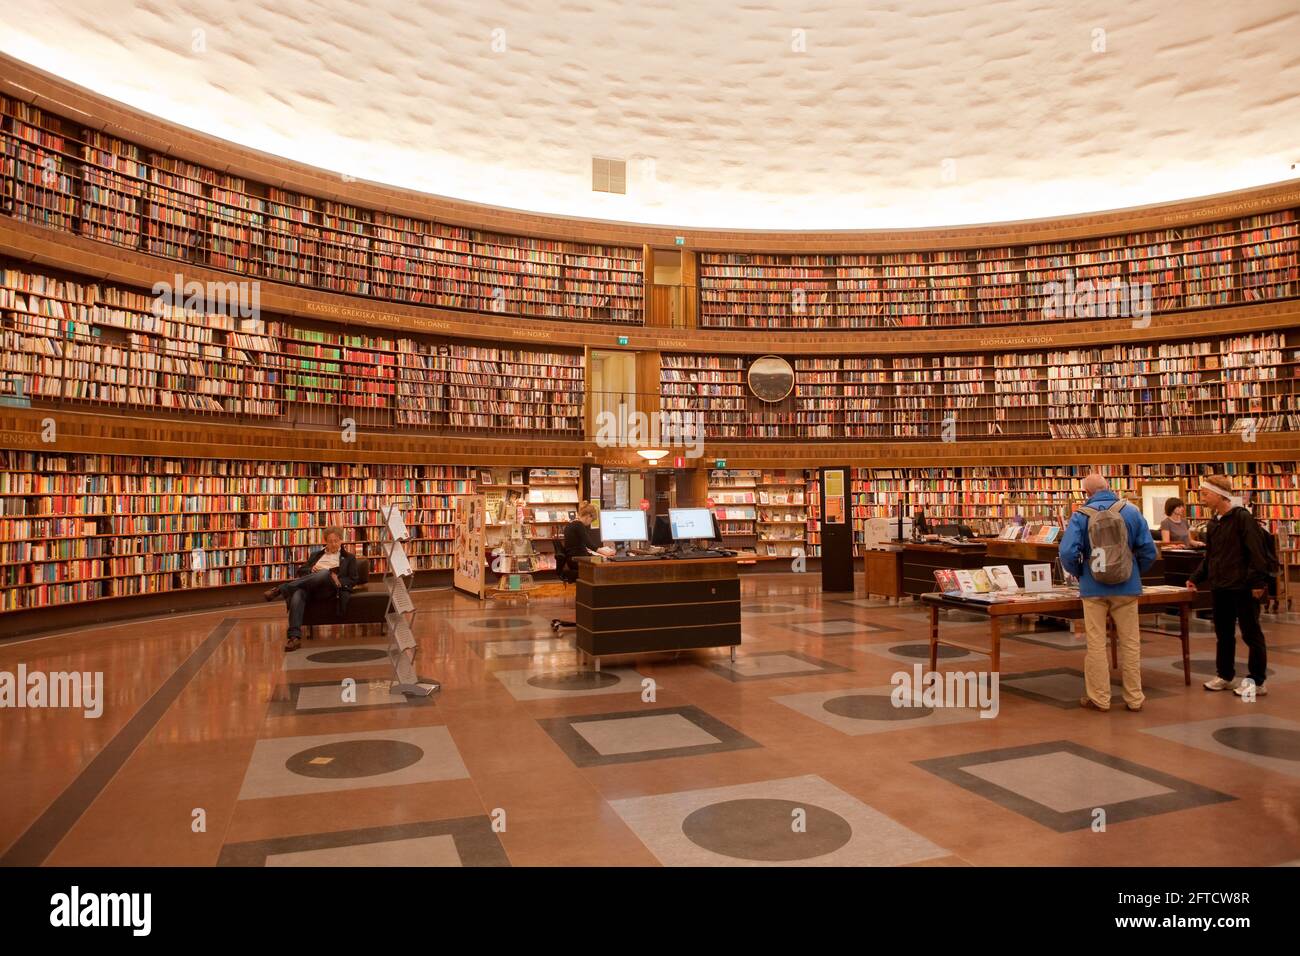 Sweden, Stockholm - Interior of Stockholm City Library. Stock Photo